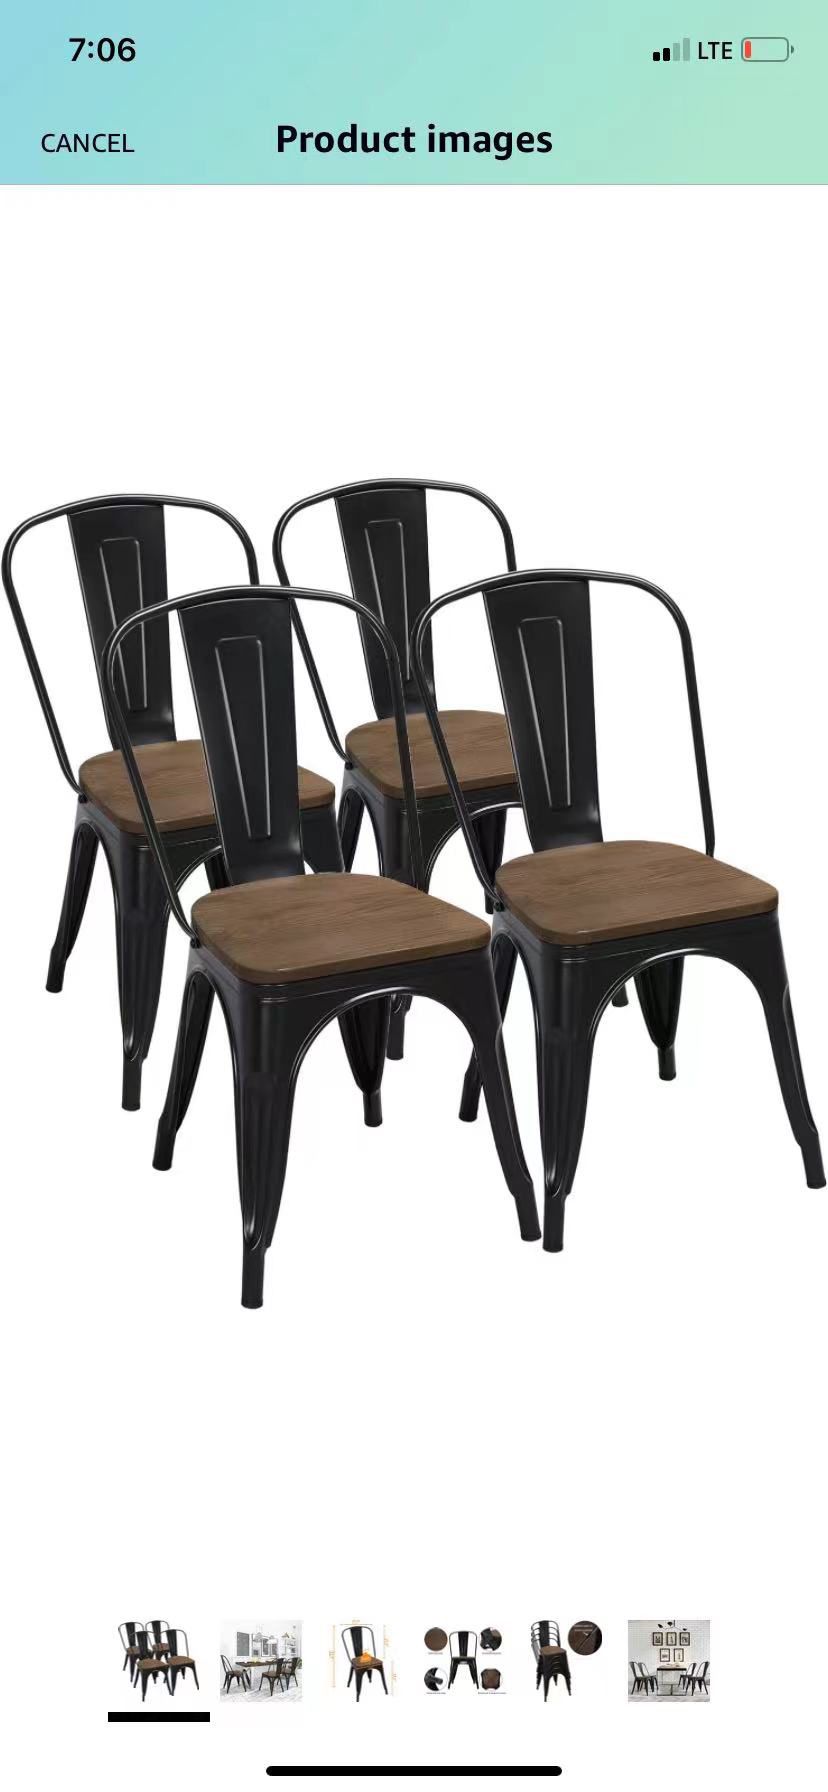  18 Inch Classic Iron Metal Dining Chair with Wood Top/Seat Indoor-Outdoor Use Chic Dining Bistro Cafe Side Barstool Bar Chair Coffee Chair Set of 4 B